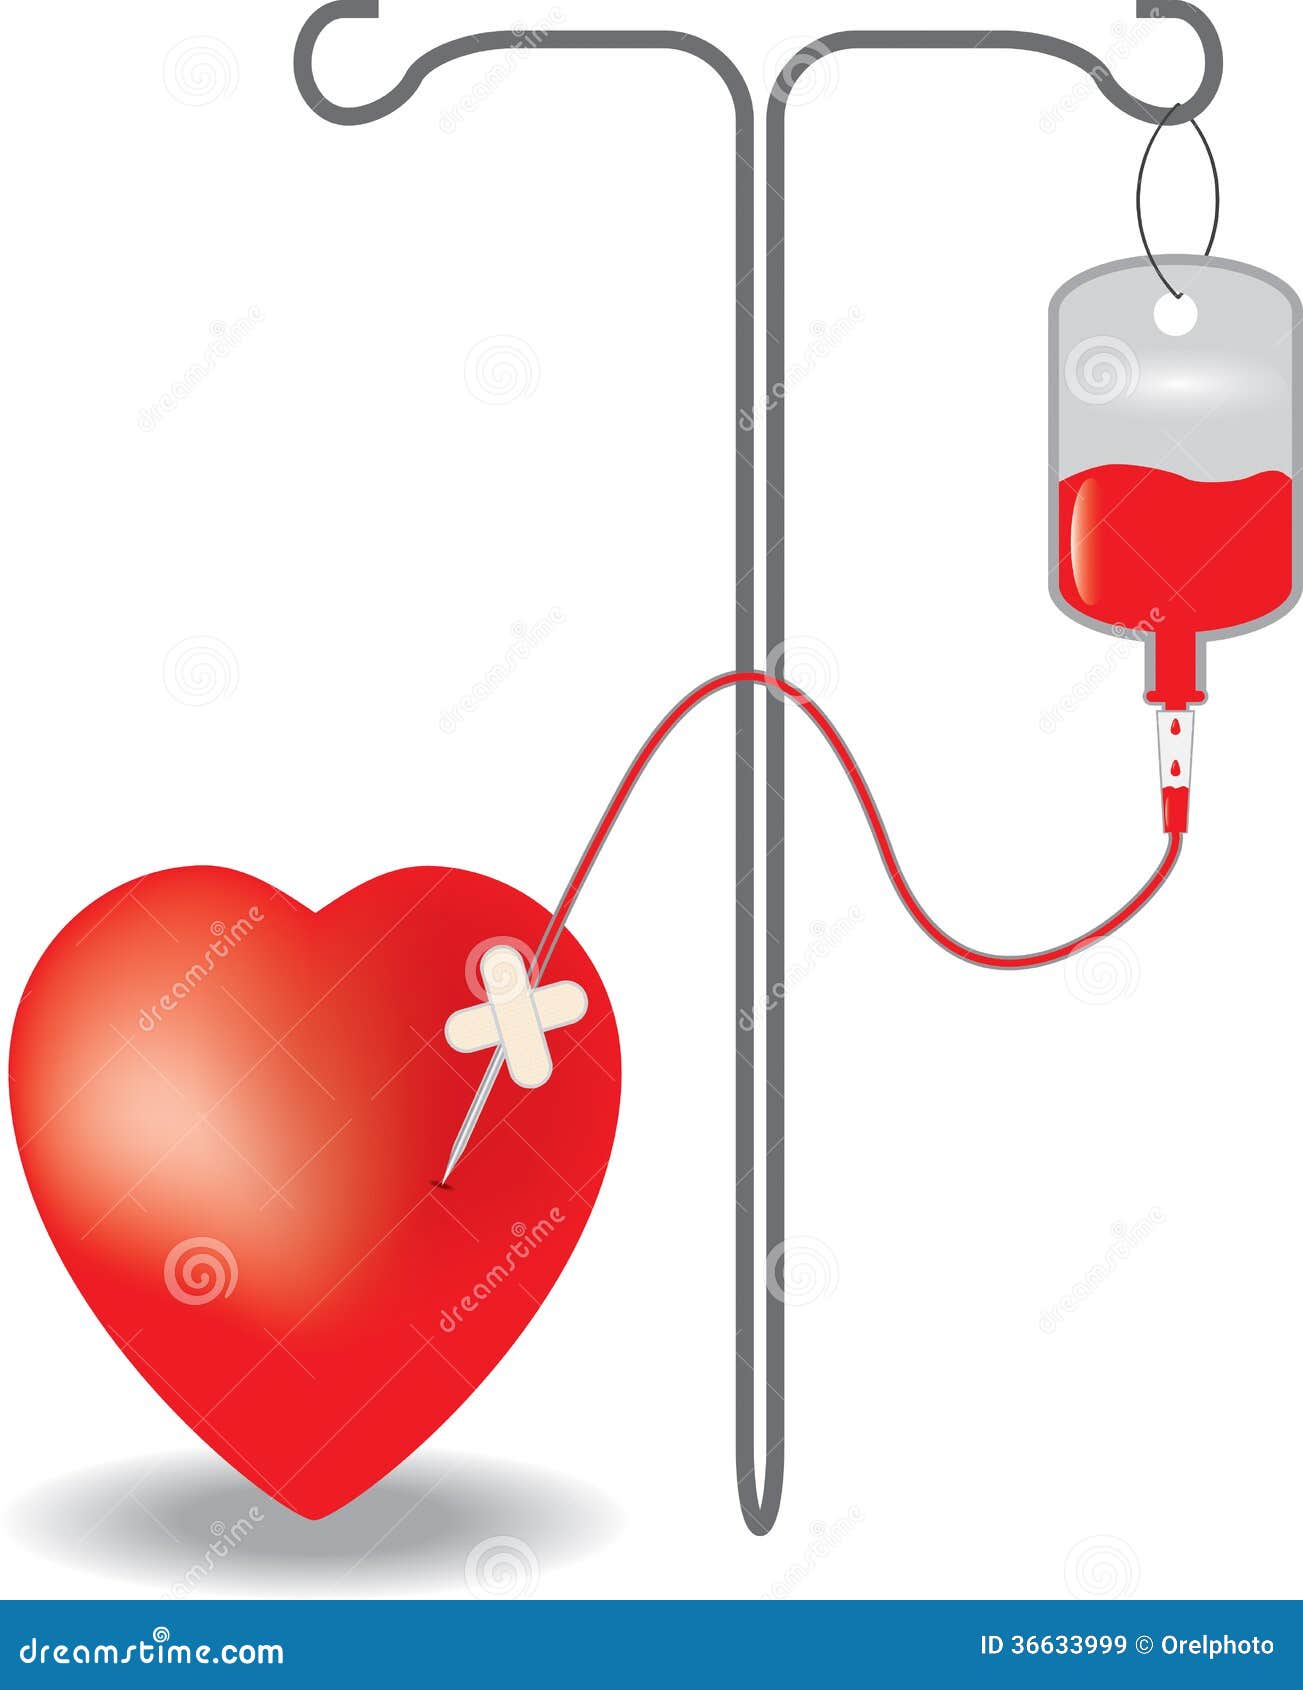 clipart of blood donation - photo #19